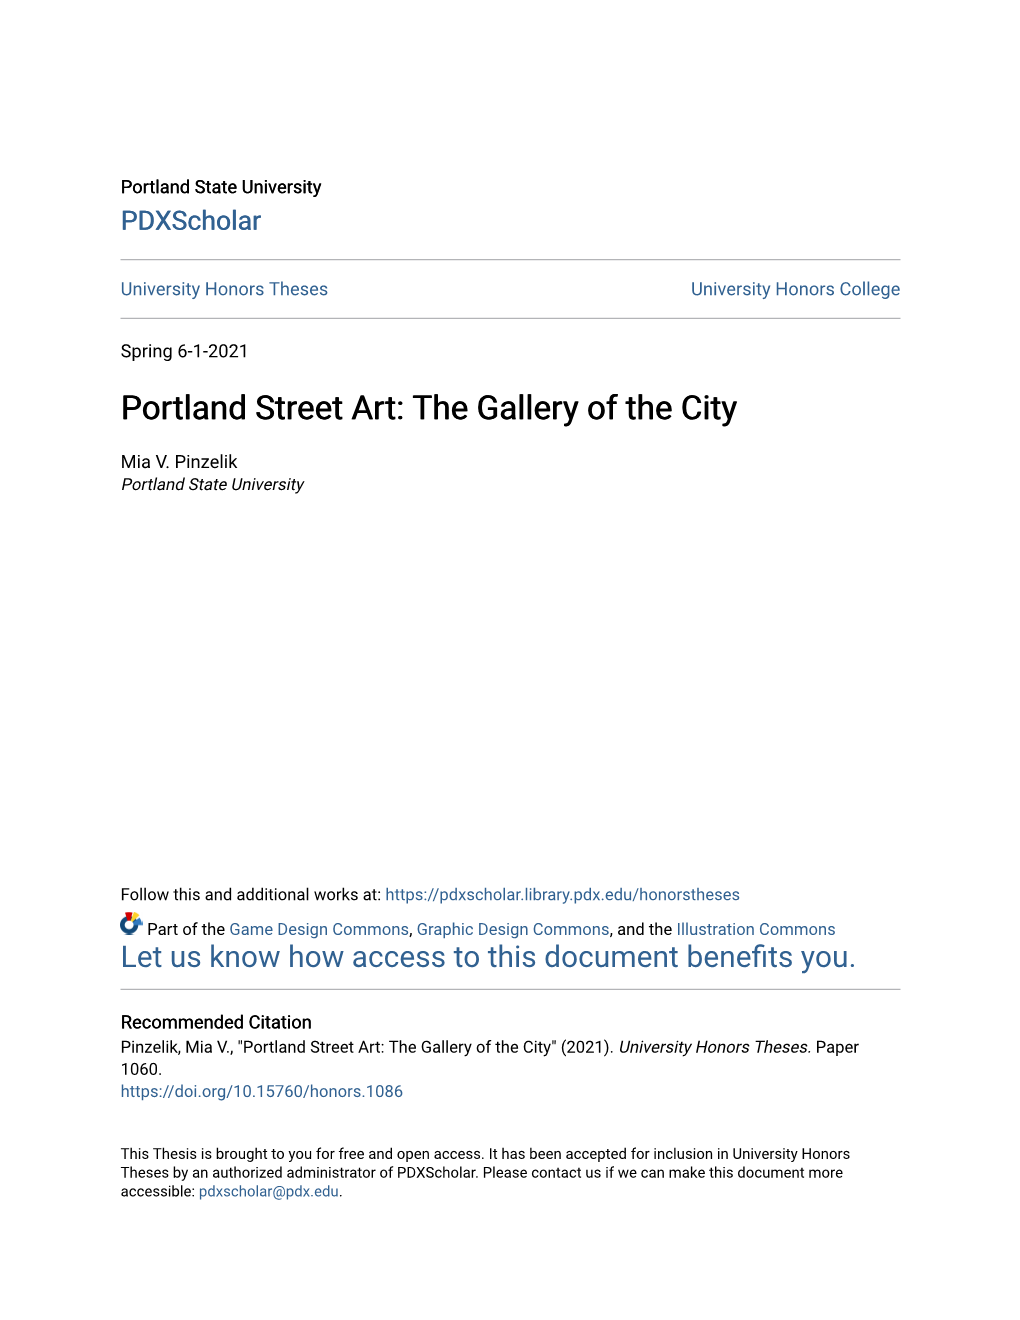 Portland Street Art: the Gallery of the City